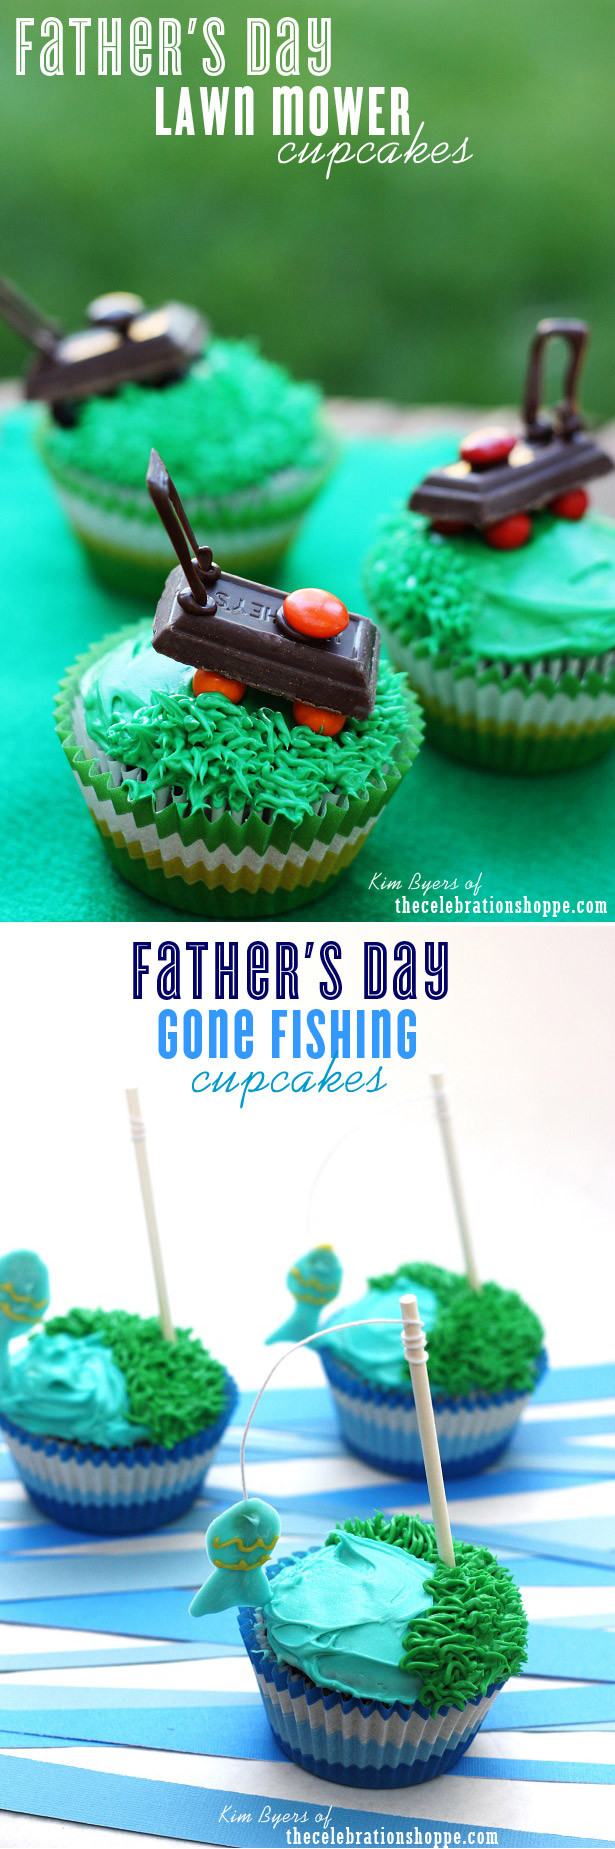 Fathers Day Cupcakes Ideas
 Easy Father s Day Cupcakes